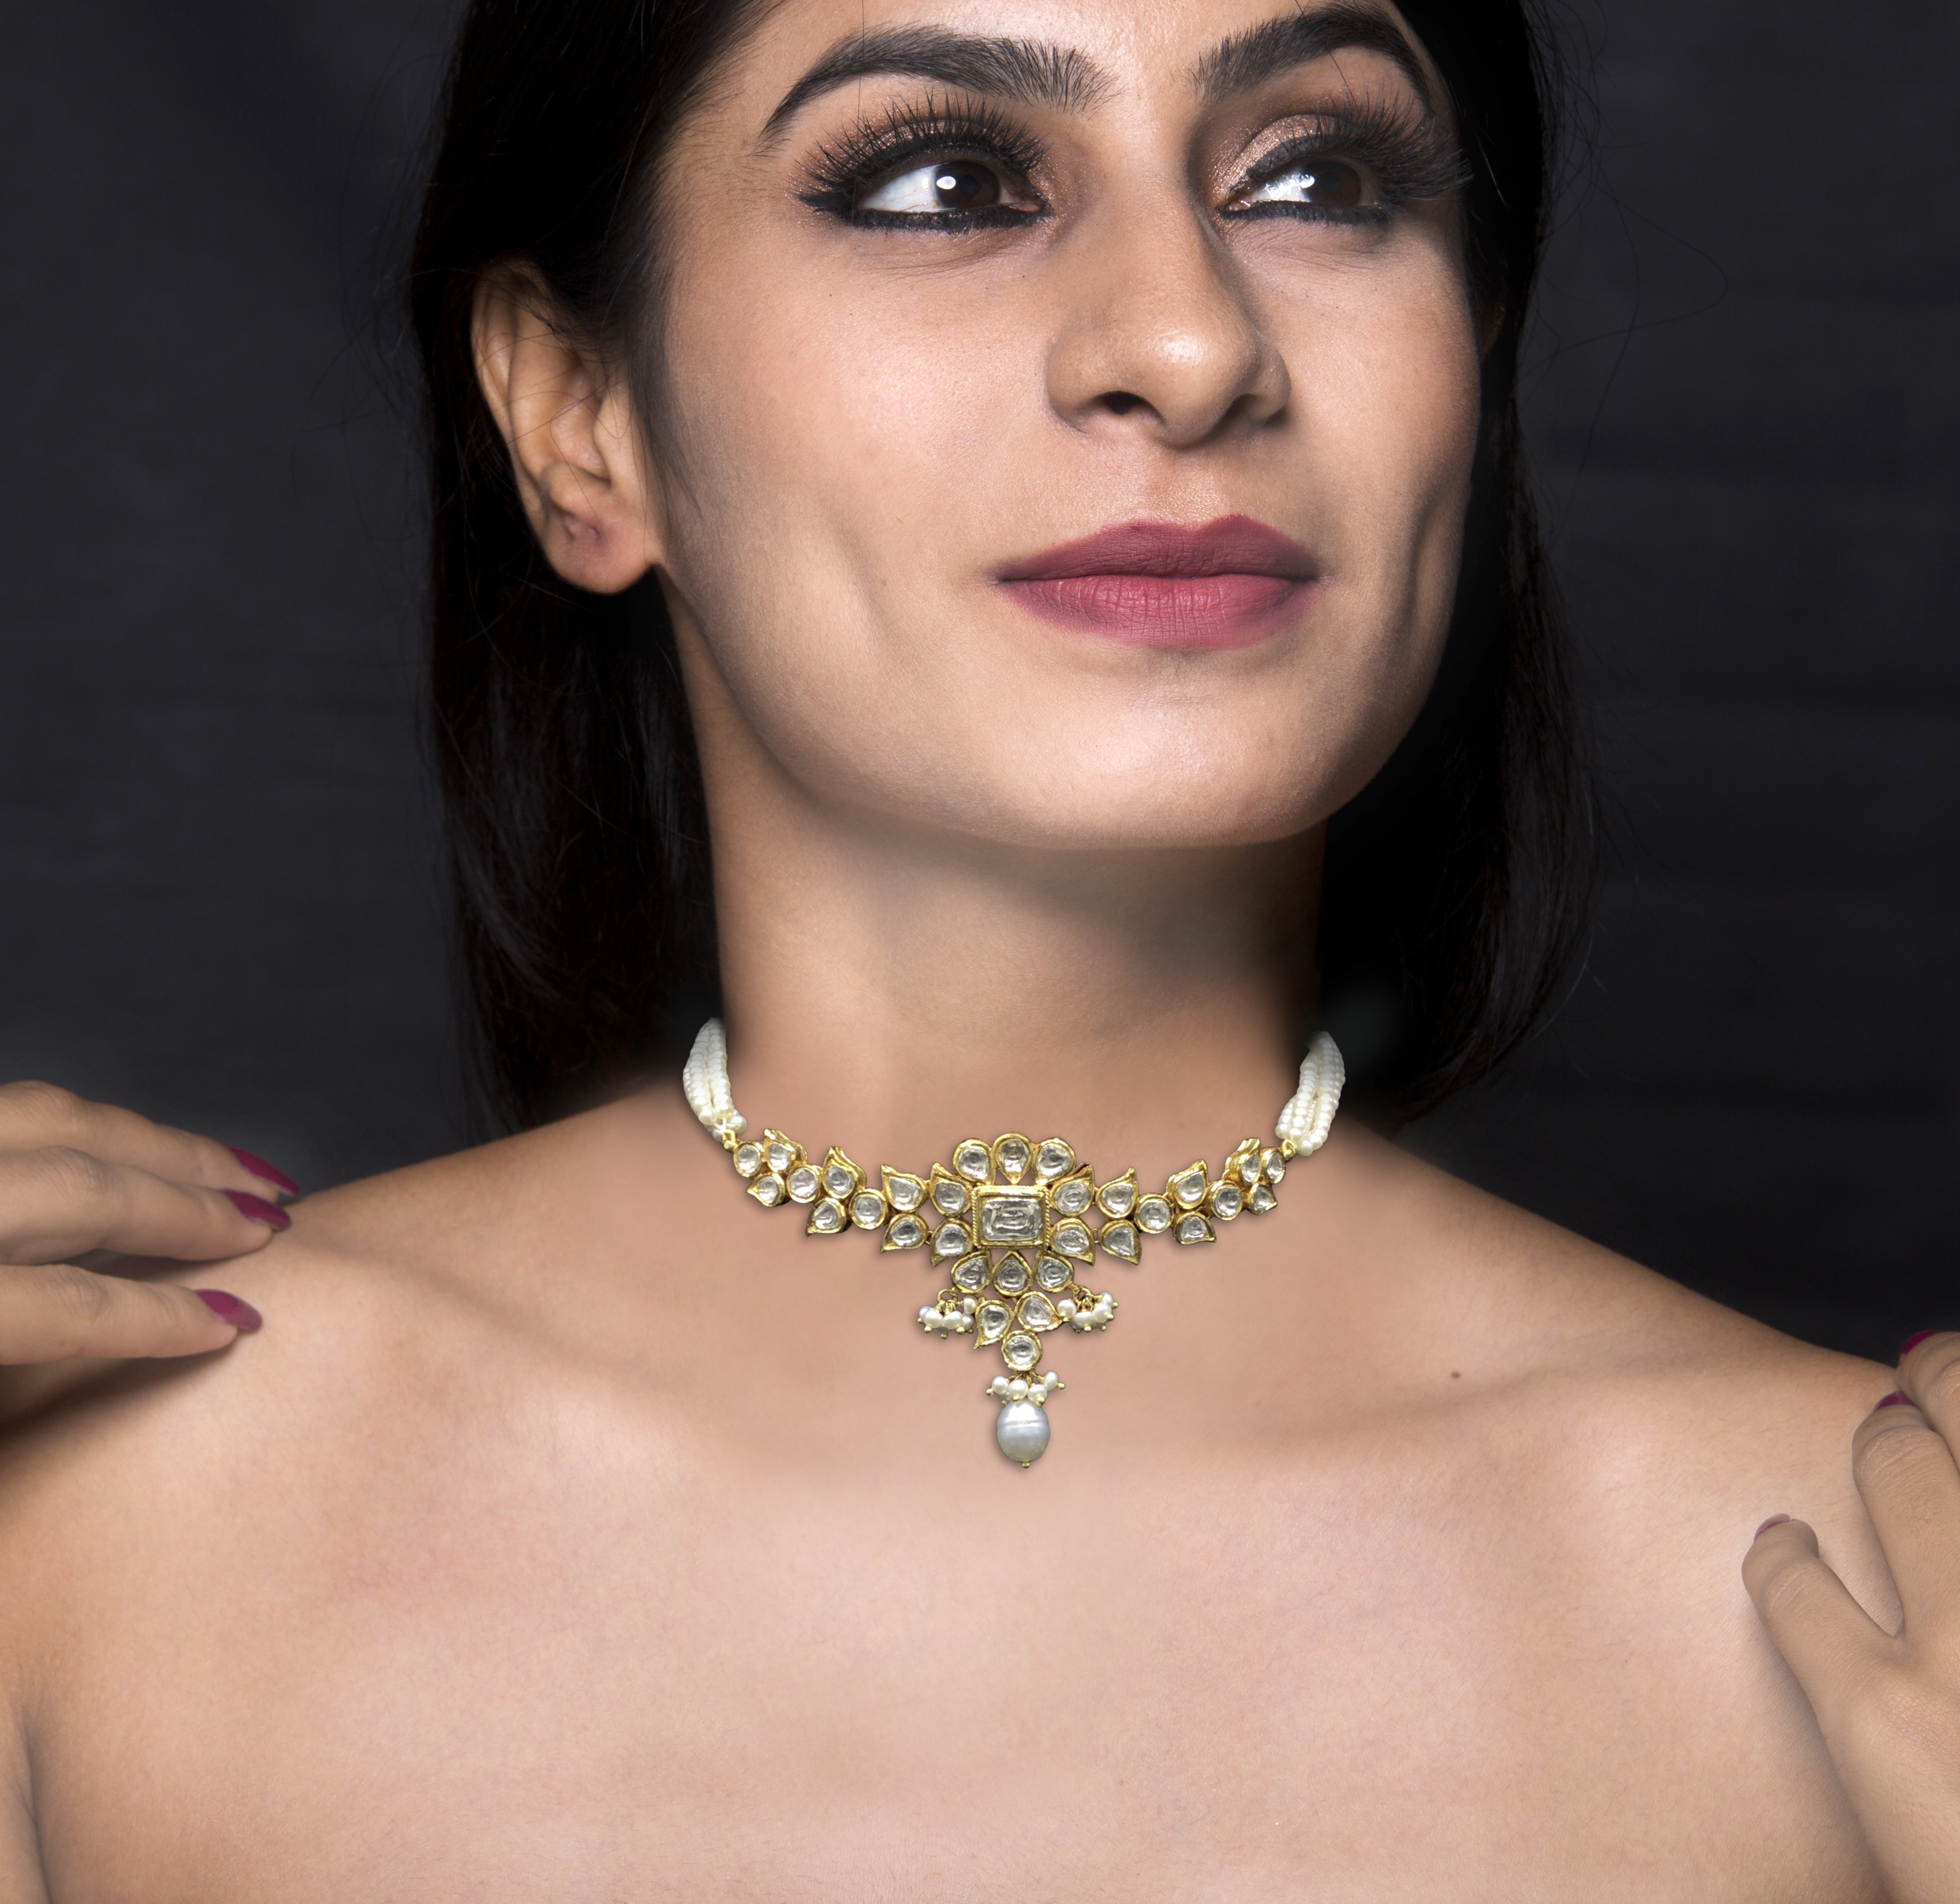 18k Gold and Diamond Polki Choker Necklace strung with Natural Freshwater Pearls